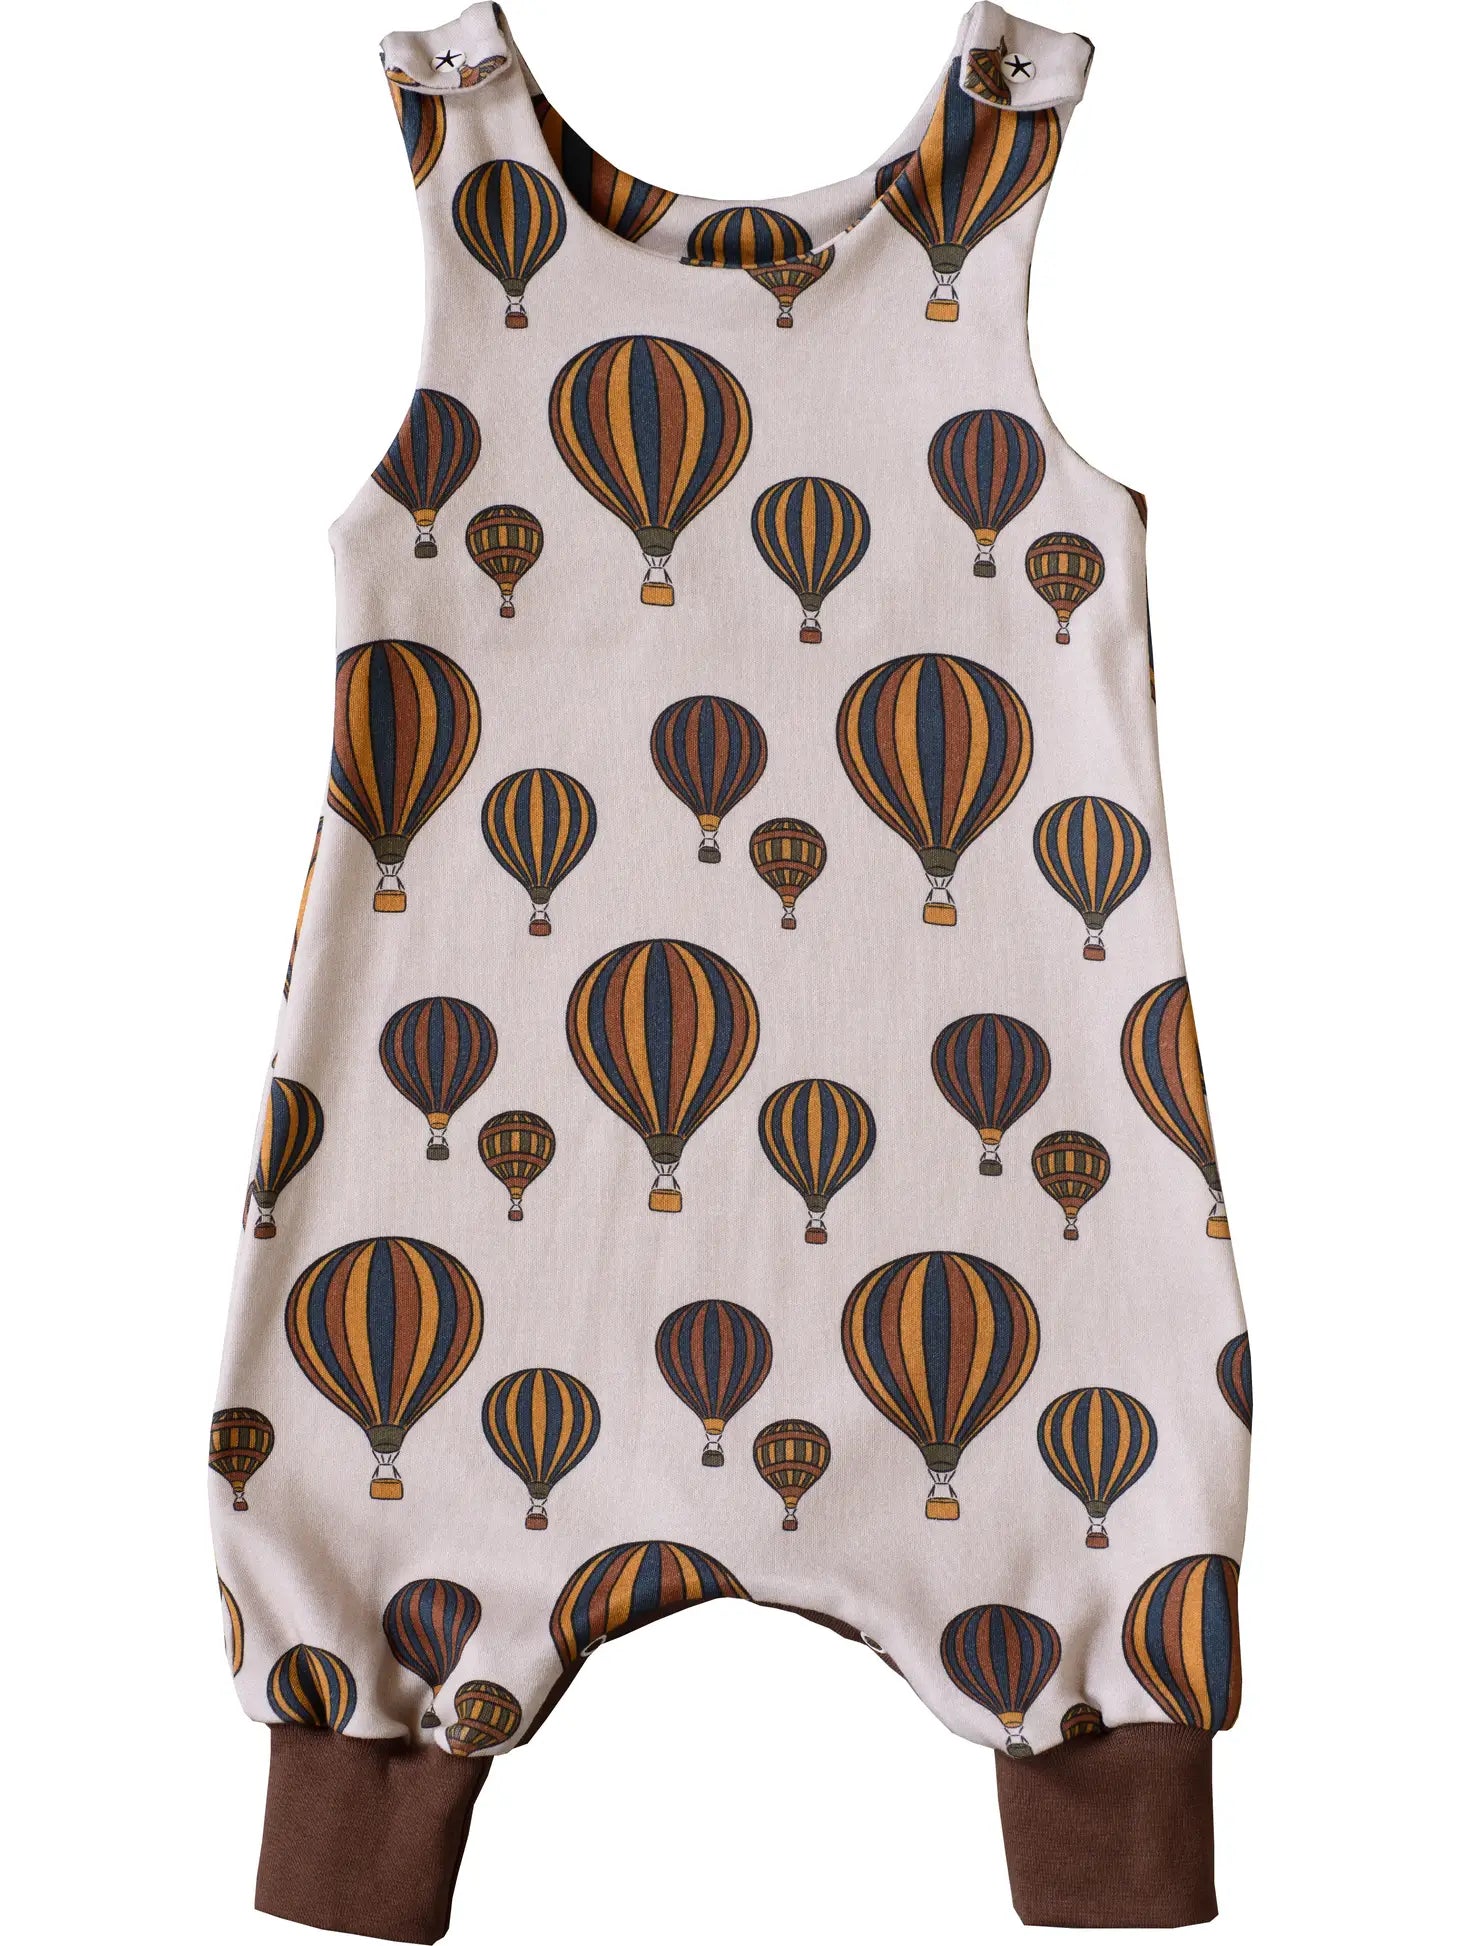 Grow with me romper for babies with hot air balloons fabric in sand colours, sizes from new born upwards.